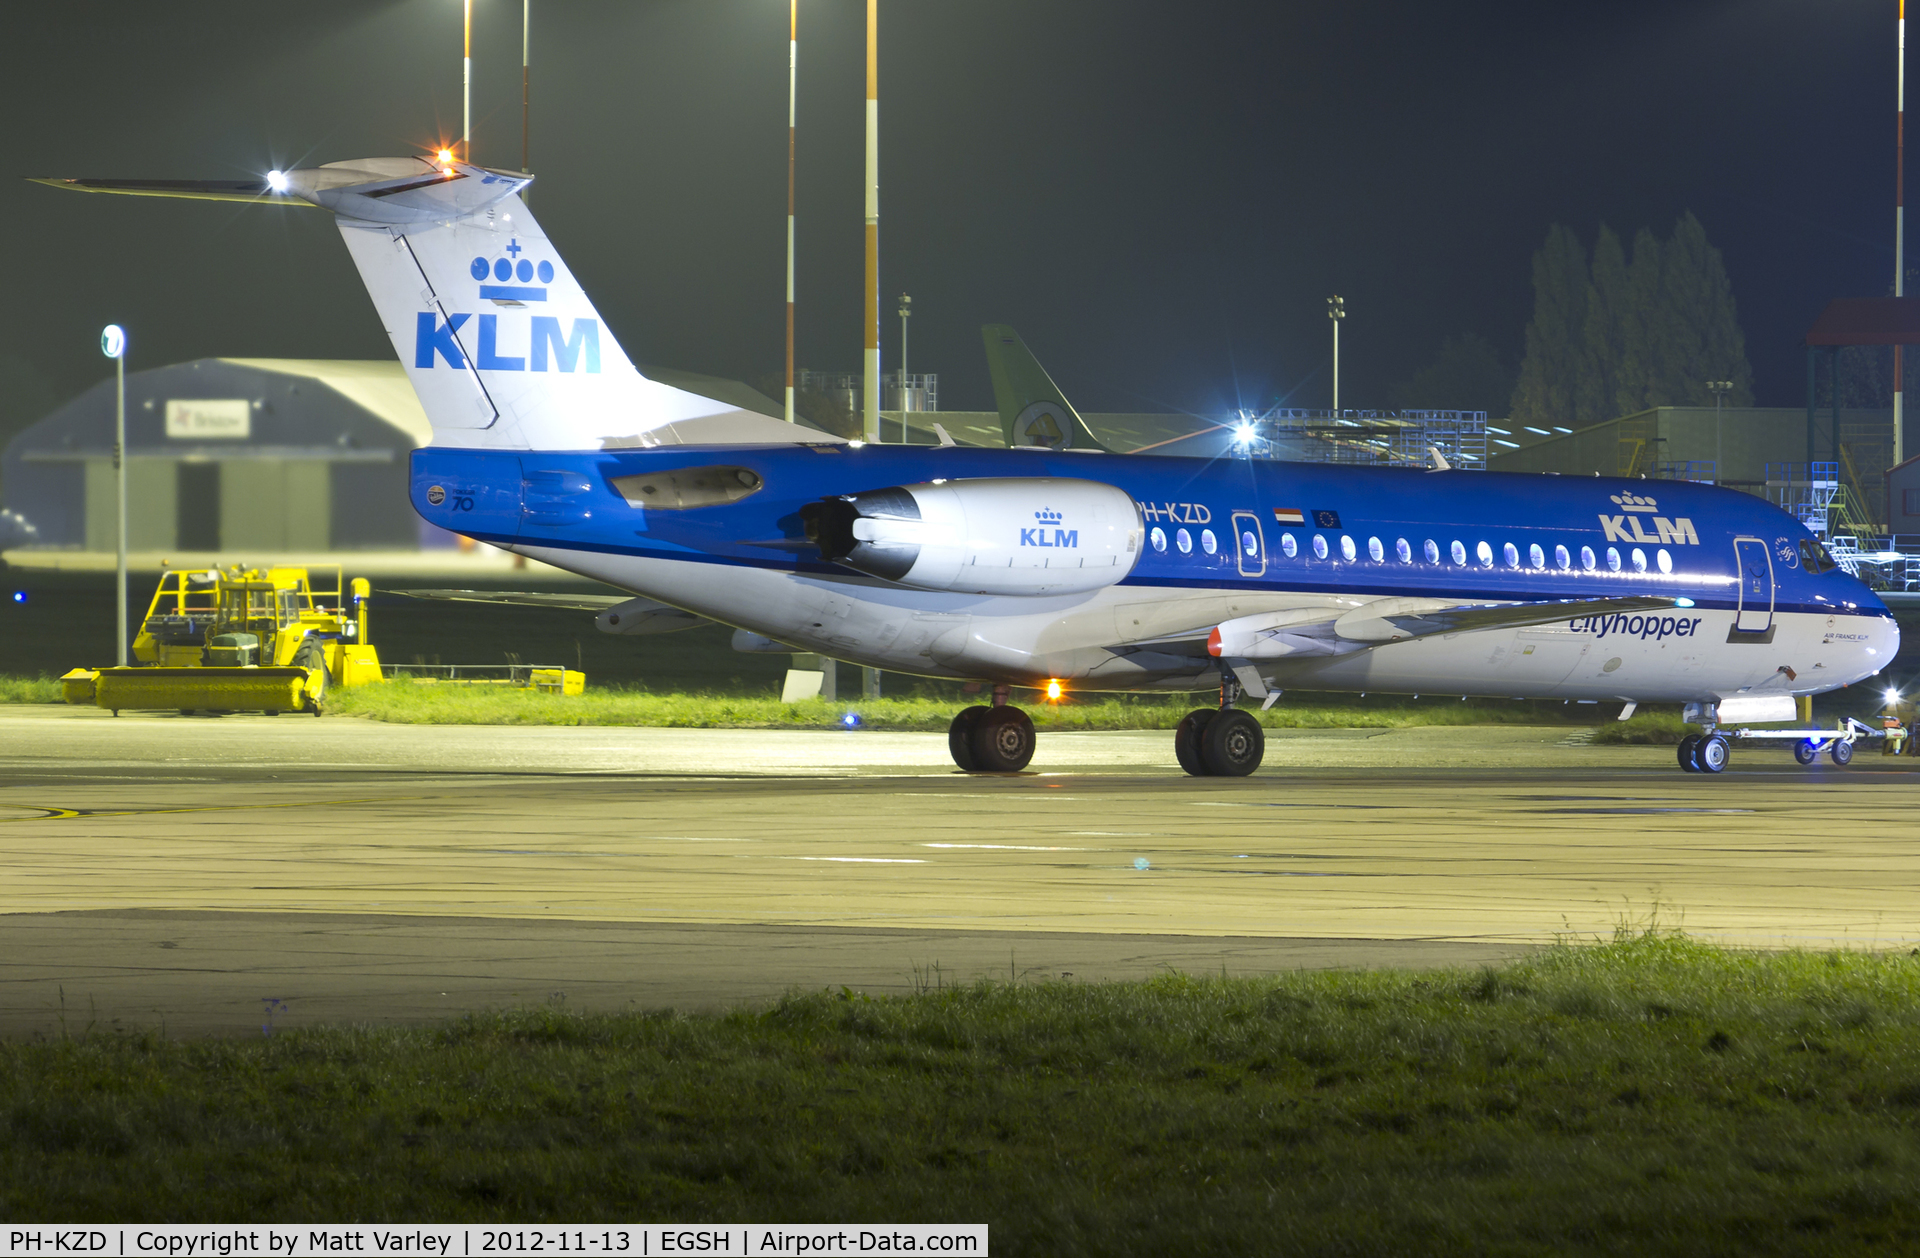 PH-KZD, 1997 Fokker 70 (F-28-0070) C/N 11582, KLM1512,Pushed back from stand 2